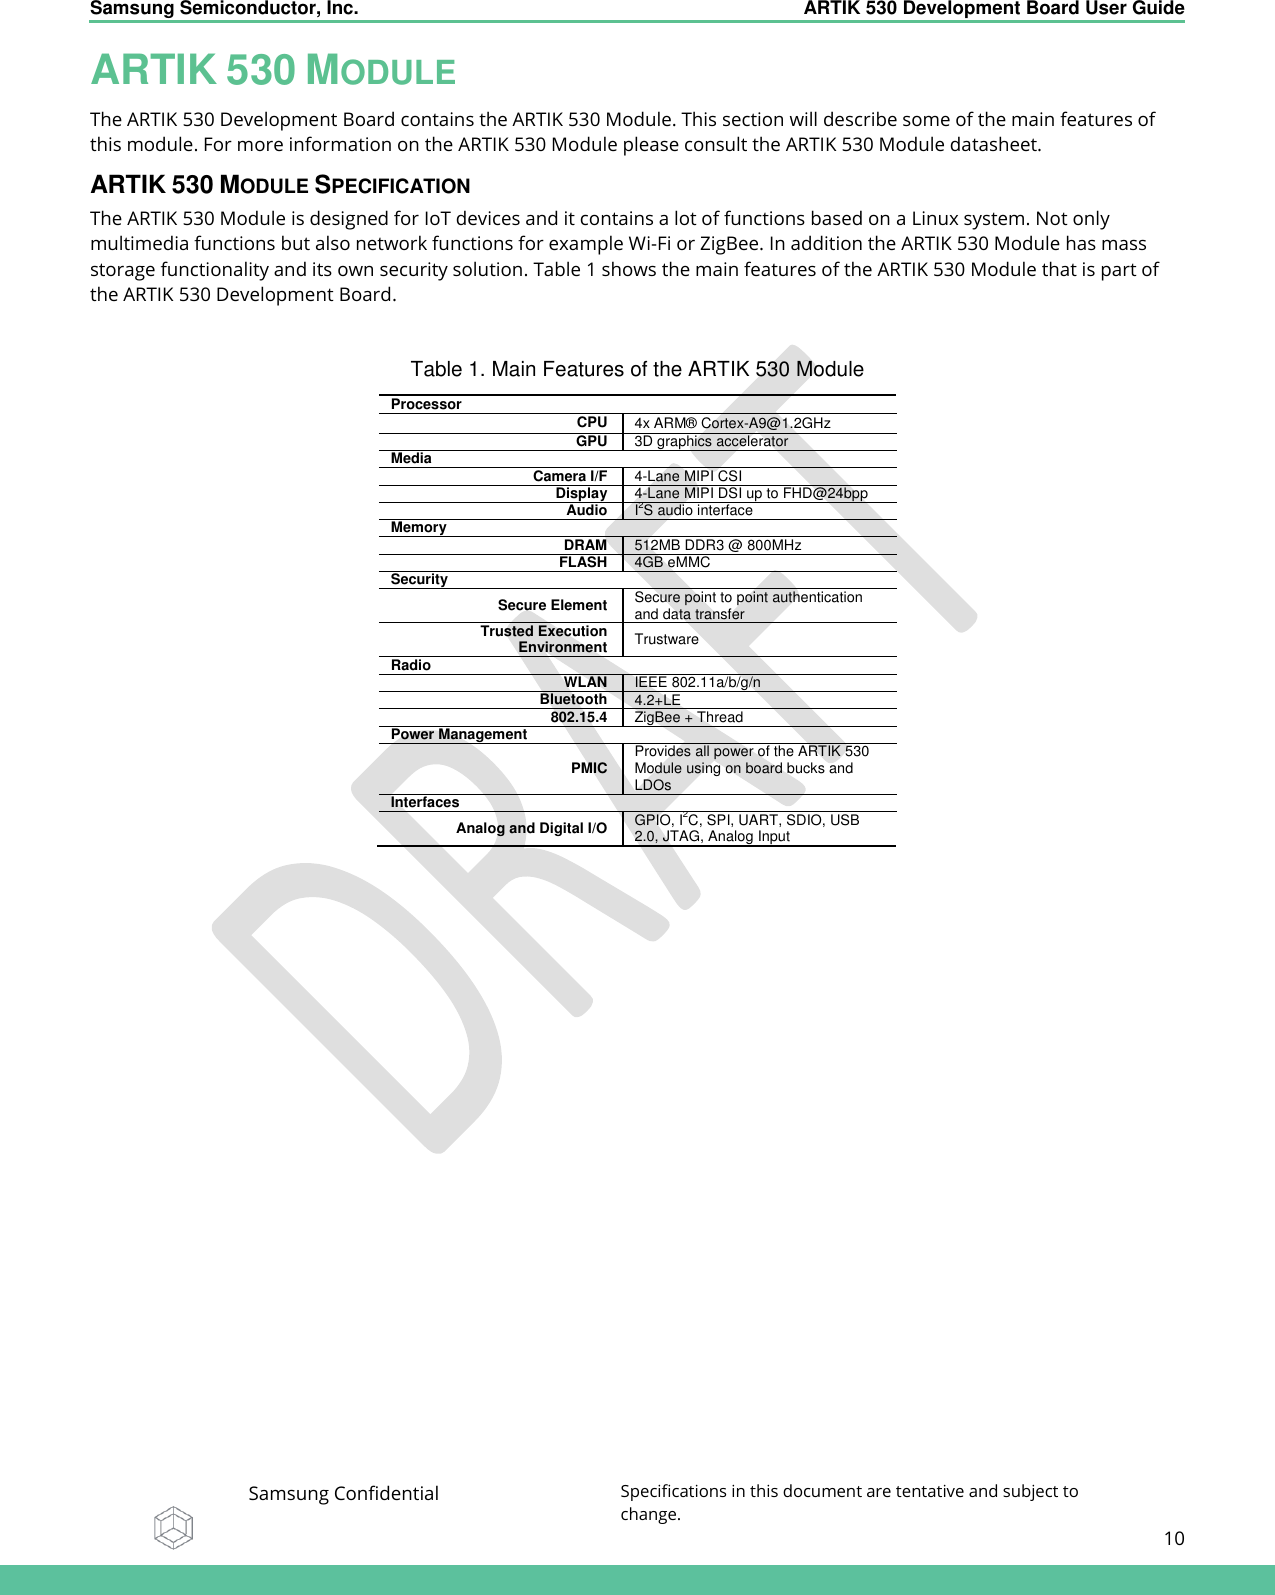    Samsung Semiconductor, Inc.  ARTIK 530 Development Board User Guide   Samsung Confidential Specifications in this document are tentative and subject to change.  10   ARTIK 530 MODULE The ARTIK 530 Development Board contains the ARTIK 530 Module. This section will describe some of the main features of this module. For more information on the ARTIK 530 Module please consult the ARTIK 530 Module datasheet. ARTIK 530 MODULE SPECIFICATION The ARTIK 530 Module is designed for IoT devices and it contains a lot of functions based on a Linux system. Not only multimedia functions but also network functions for example Wi-Fi or ZigBee. In addition the ARTIK 530 Module has mass storage functionality and its own security solution. Table 1 shows the main features of the ARTIK 530 Module that is part of the ARTIK 530 Development Board.  Table 1. Main Features of the ARTIK 530 Module Processor CPU 4x ARM®  Cortex-A9@1.2GHz GPU 3D graphics accelerator Media Camera I/F 4-Lane MIPI CSI Display 4-Lane MIPI DSI up to FHD@24bpp Audio I2S audio interface Memory DRAM 512MB DDR3 @ 800MHz FLASH 4GB eMMC Security Secure Element Secure point to point authentication and data transfer Trusted Execution Environment Trustware Radio WLAN IEEE 802.11a/b/g/n Bluetooth 4.2+LE 802.15.4 ZigBee + Thread Power Management PMIC Provides all power of the ARTIK 530 Module using on board bucks and LDOs Interfaces Analog and Digital I/O GPIO, I2C, SPI, UART, SDIO, USB 2.0, JTAG, Analog Input   